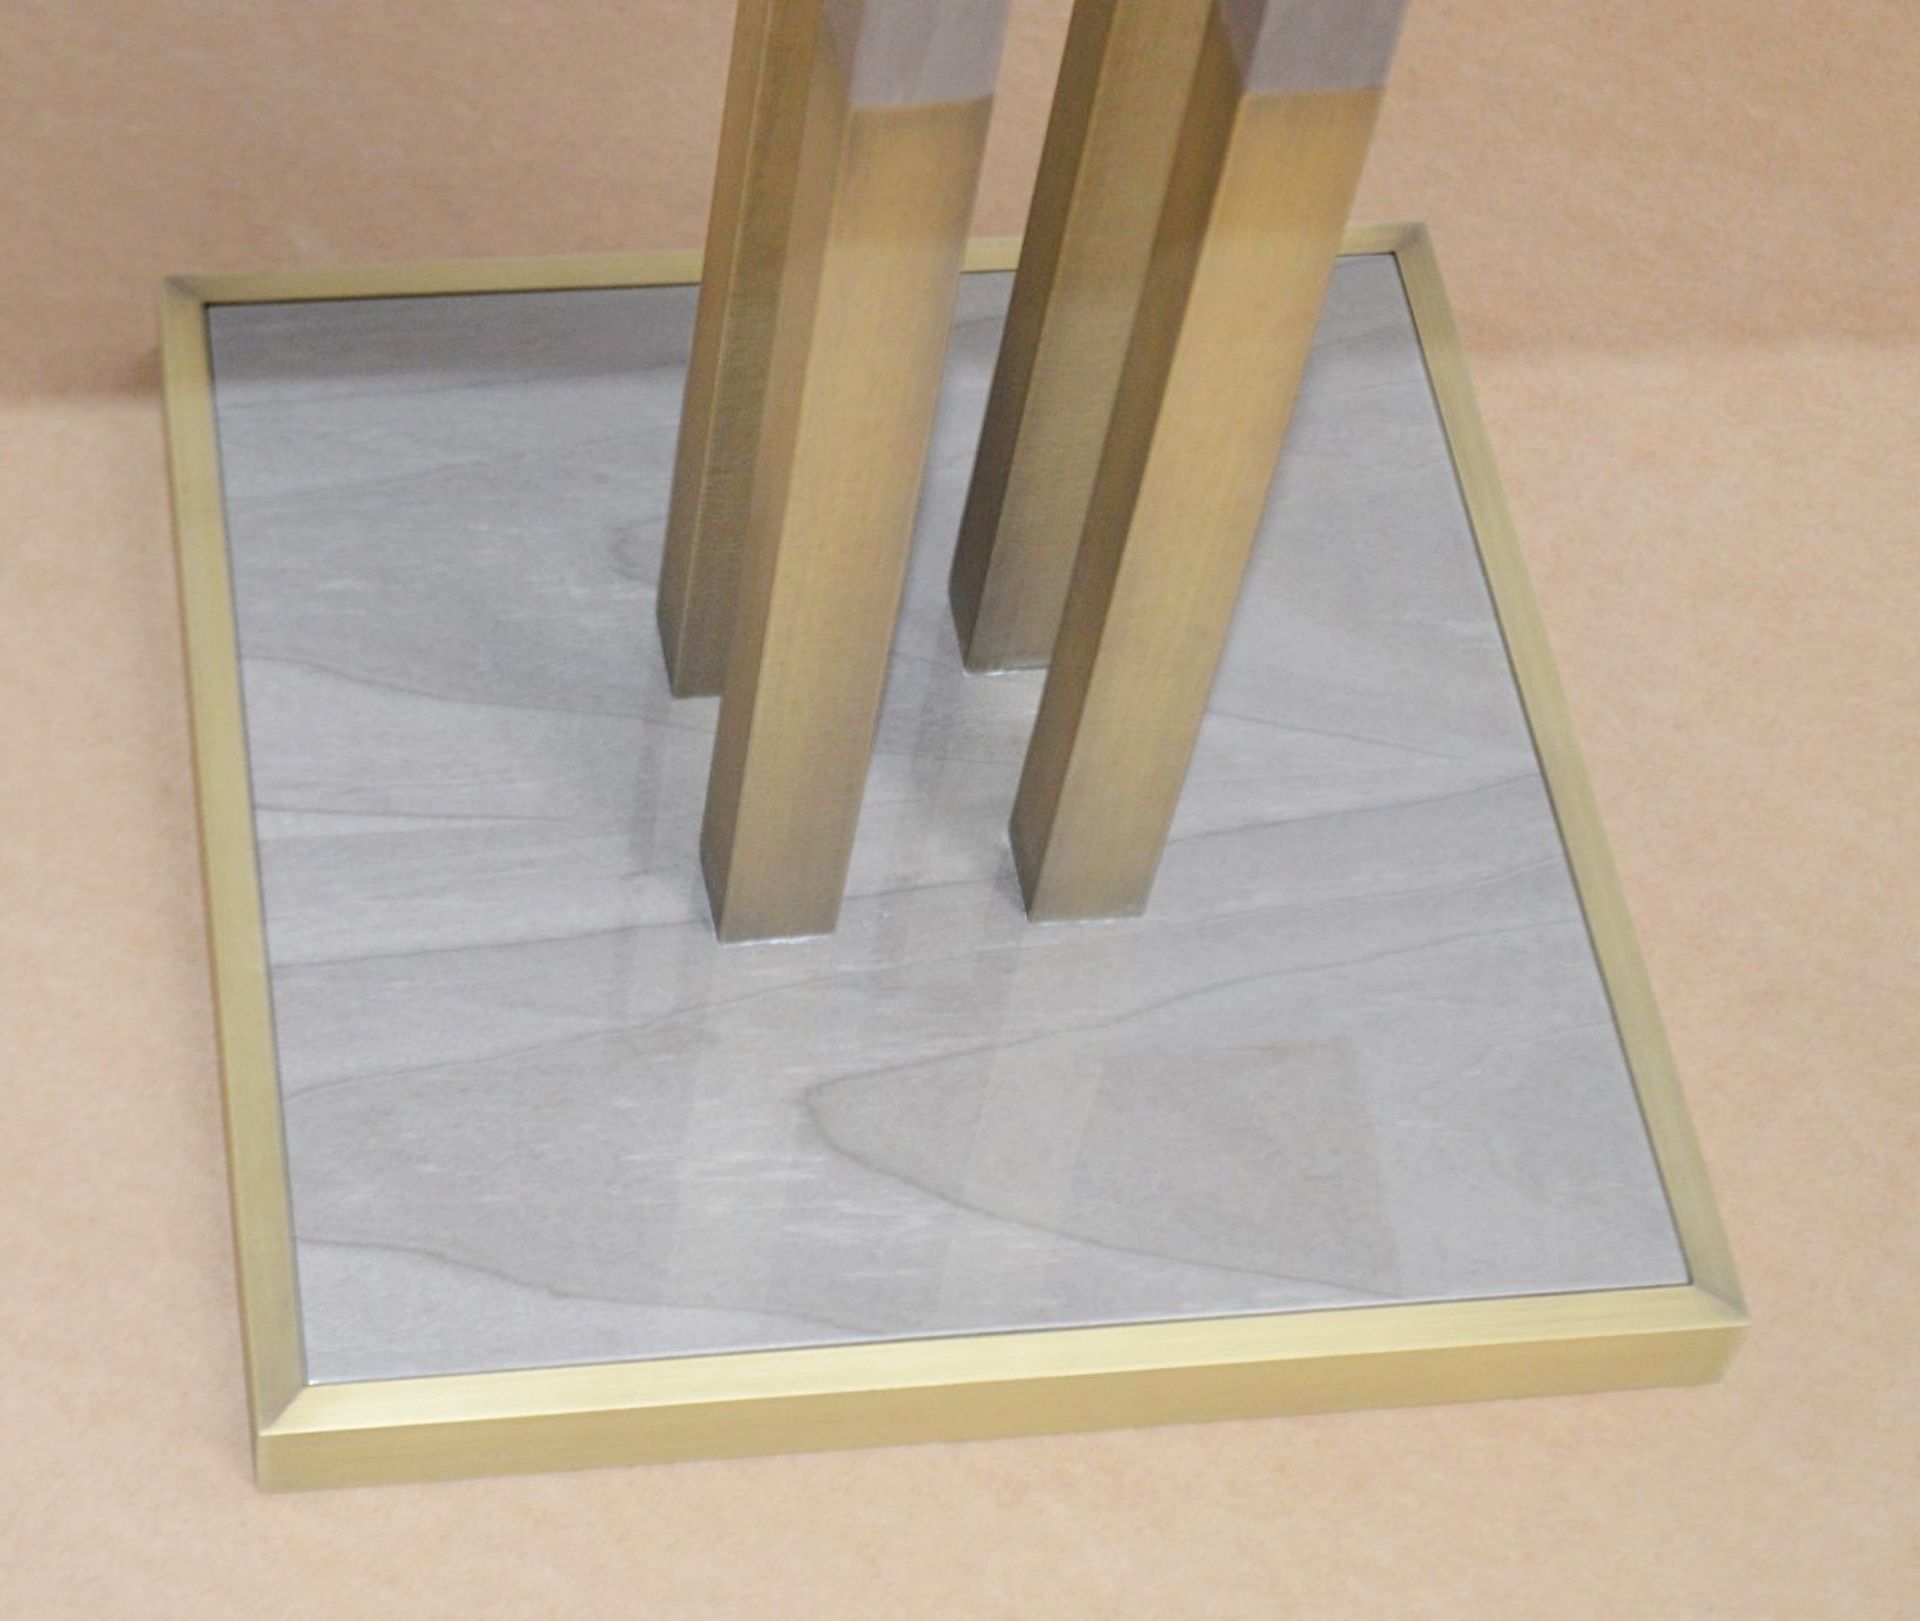 1 x FRATO 'Perth' Luxury Side Table With A Limed Wood Finish, and Brushed Brass Details - - Image 5 of 5